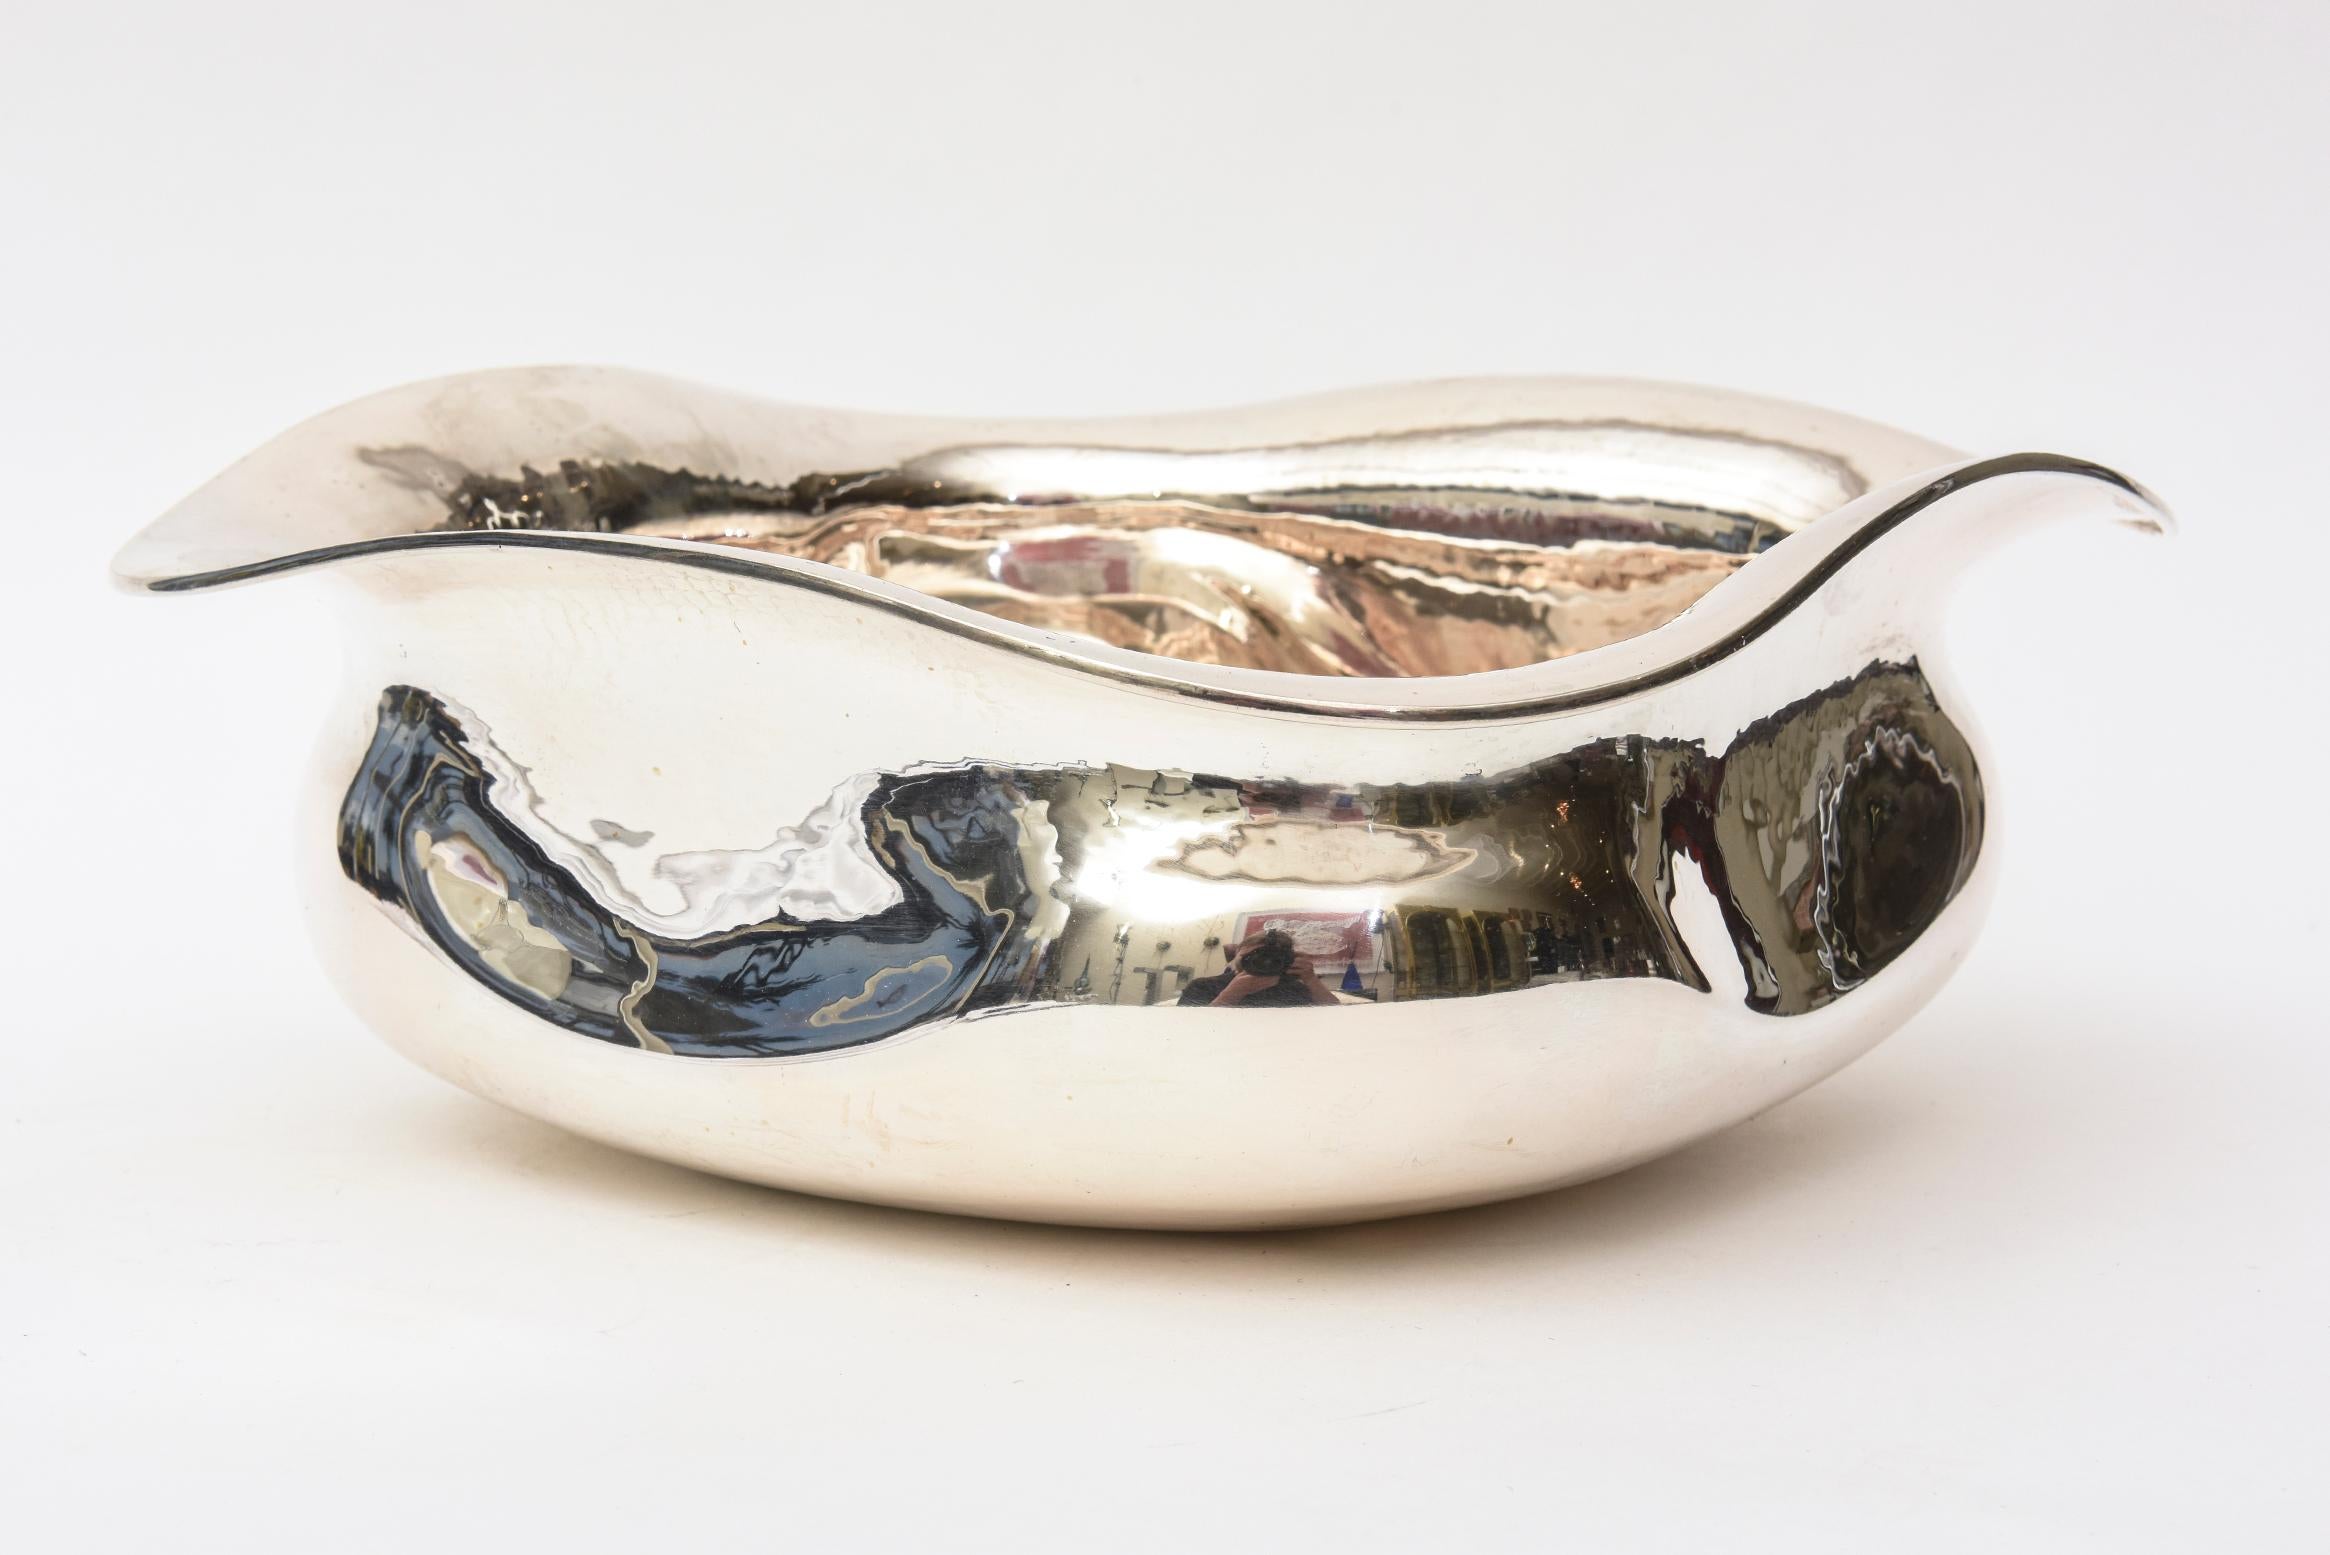 This gorgeous and substantial Italian 1980s sterling silver bowl is so sculptural. It is 800 Italian silver. It is perfect as a beautiful form or for serving. it is modernist and modern yet rings with elegance. Great for all your entertaining needs.